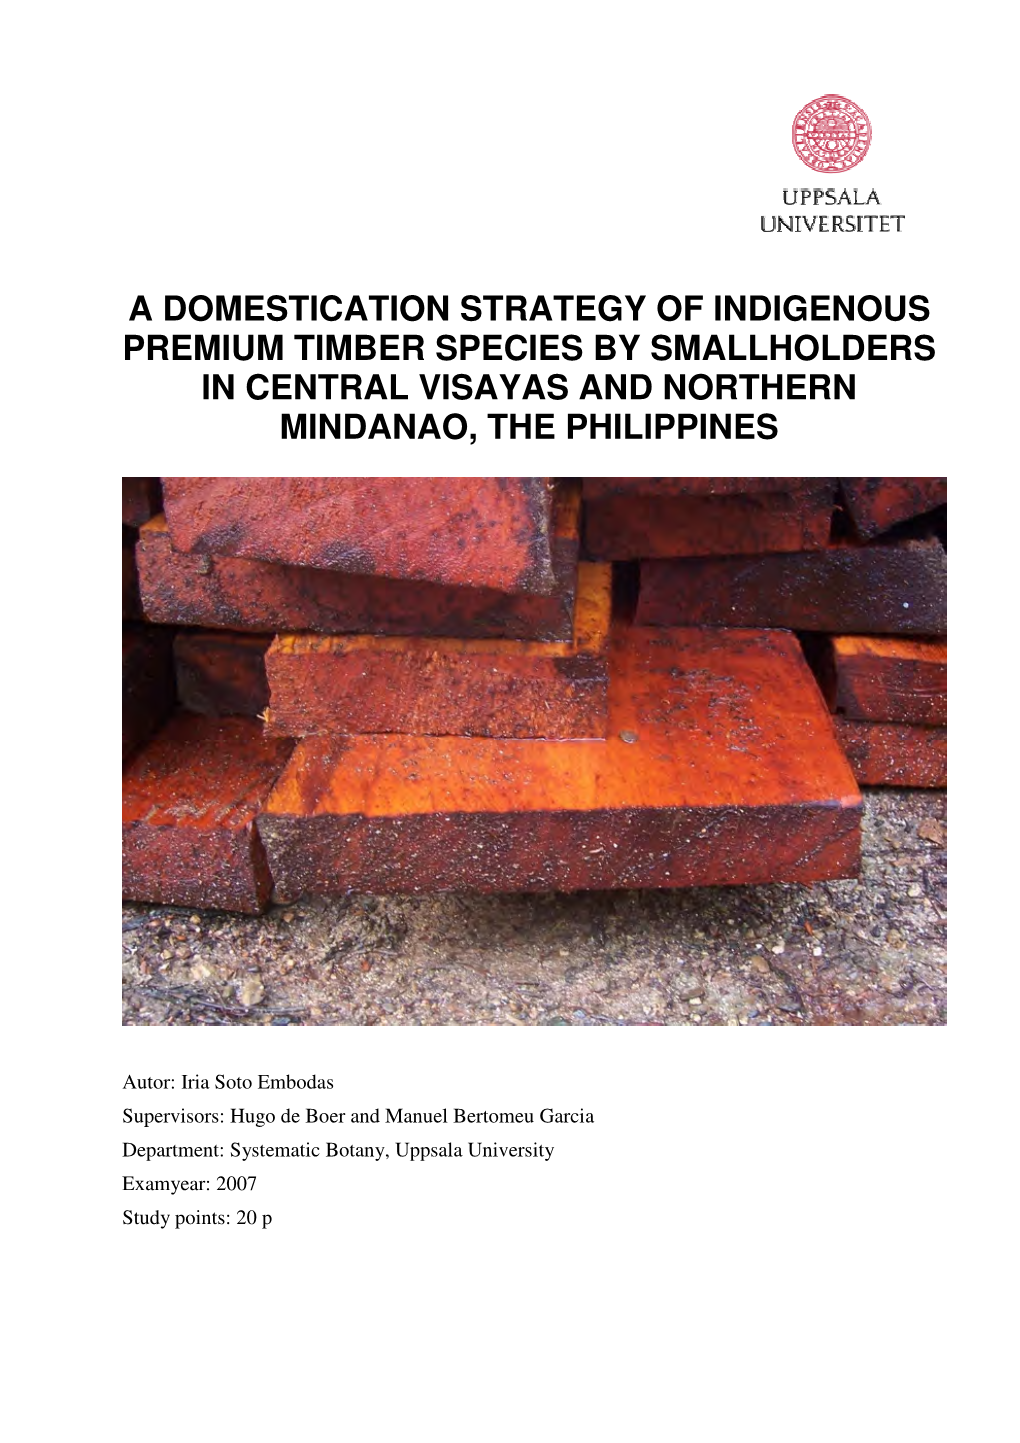 A Domestication Strategy of Indigenous Premium Timber Species by Smallholders in Central Visayas and Northern Mindanao, the Philippines